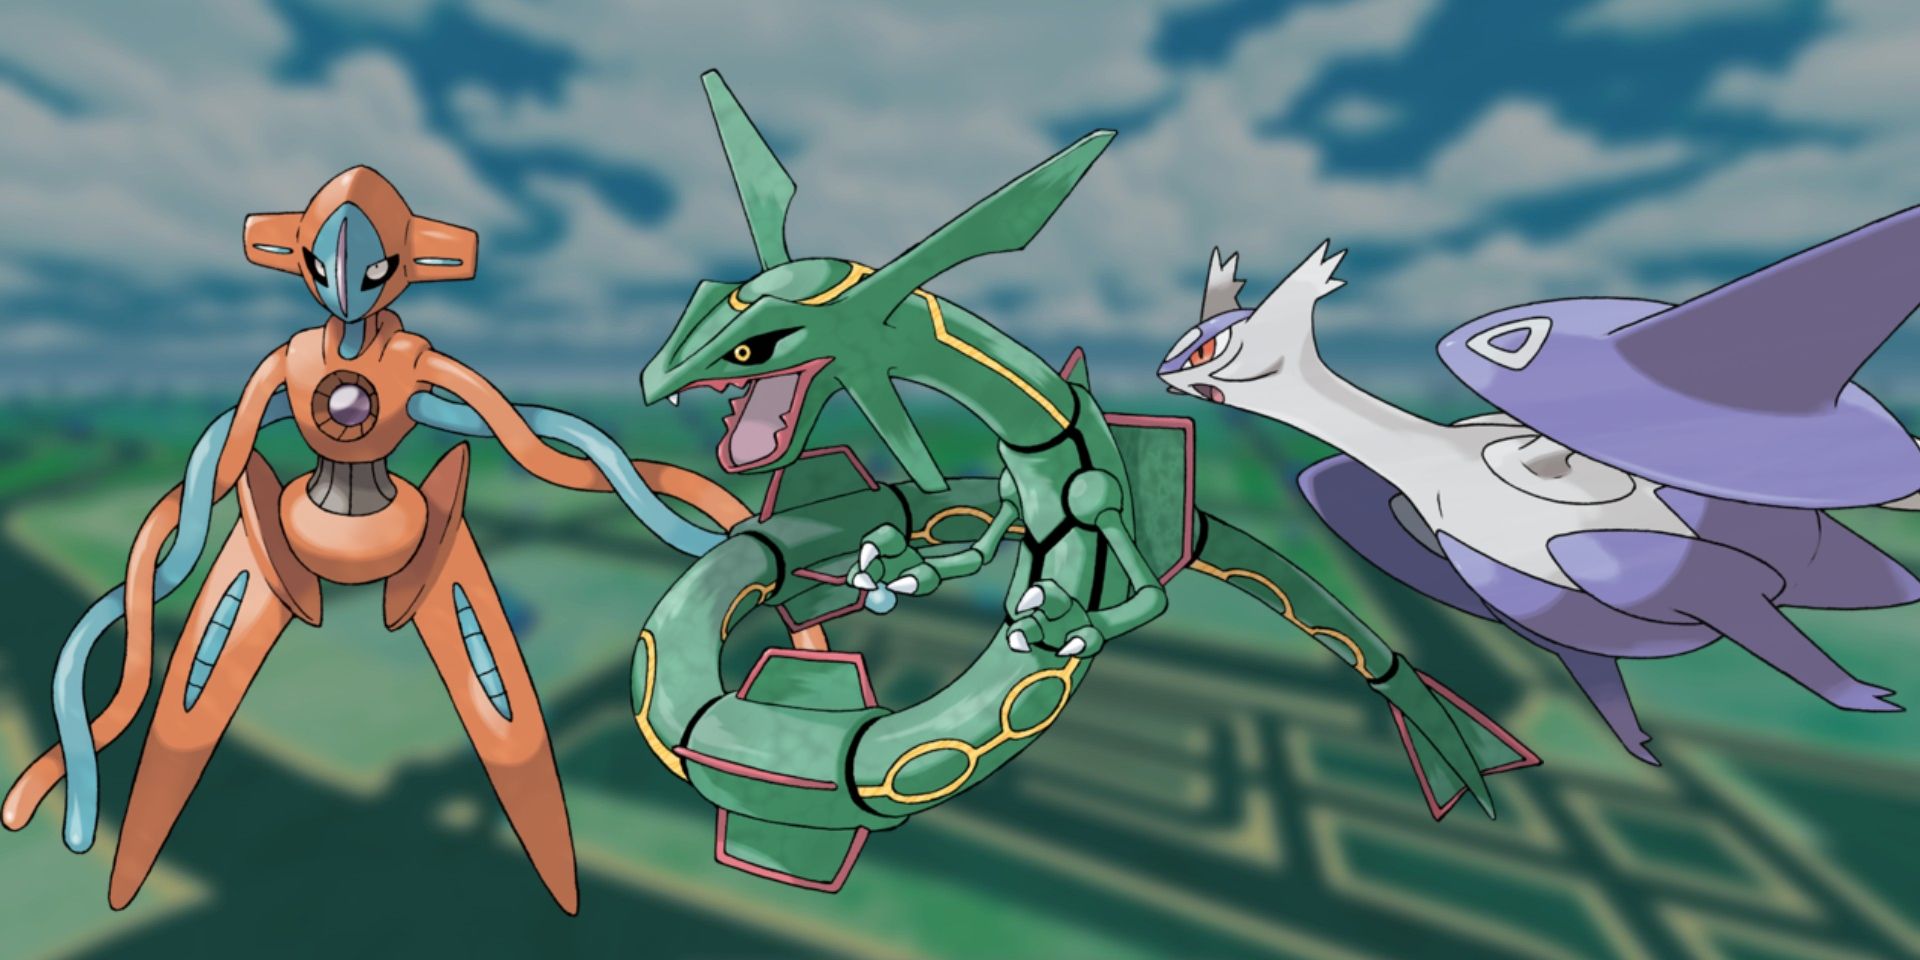 Rayquaza, Mega Latios, and Deoxys featured in the image with Pokemon GO's map blurred-out in the background.